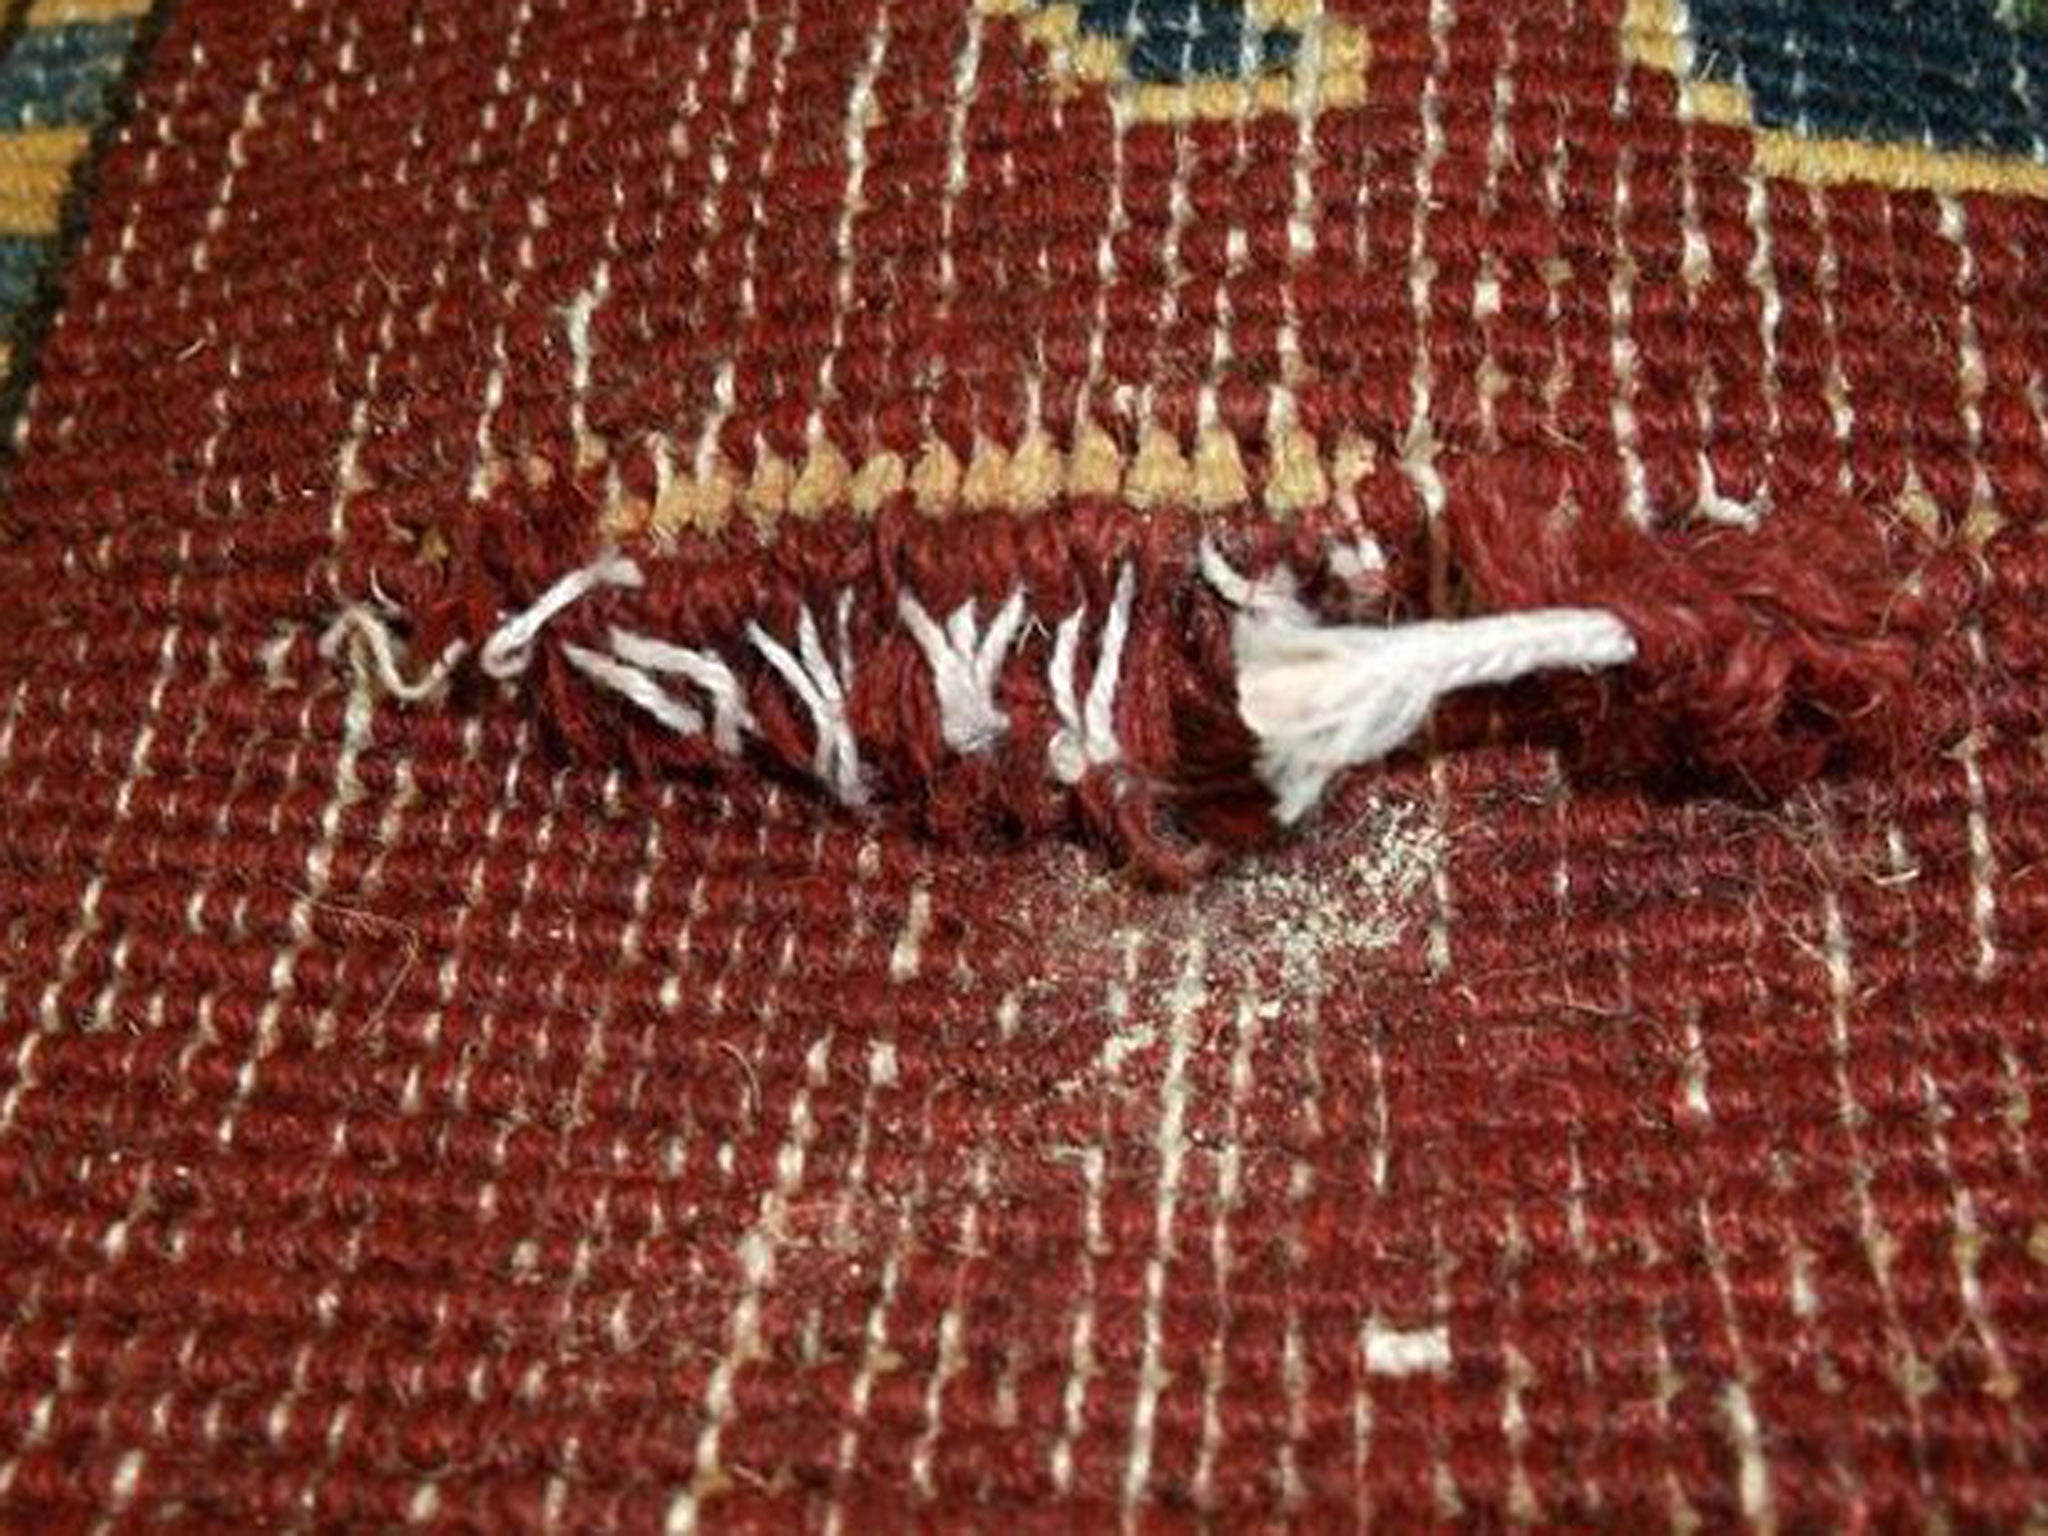 Packets of heroin woven into hand-made rugs from Pakistan